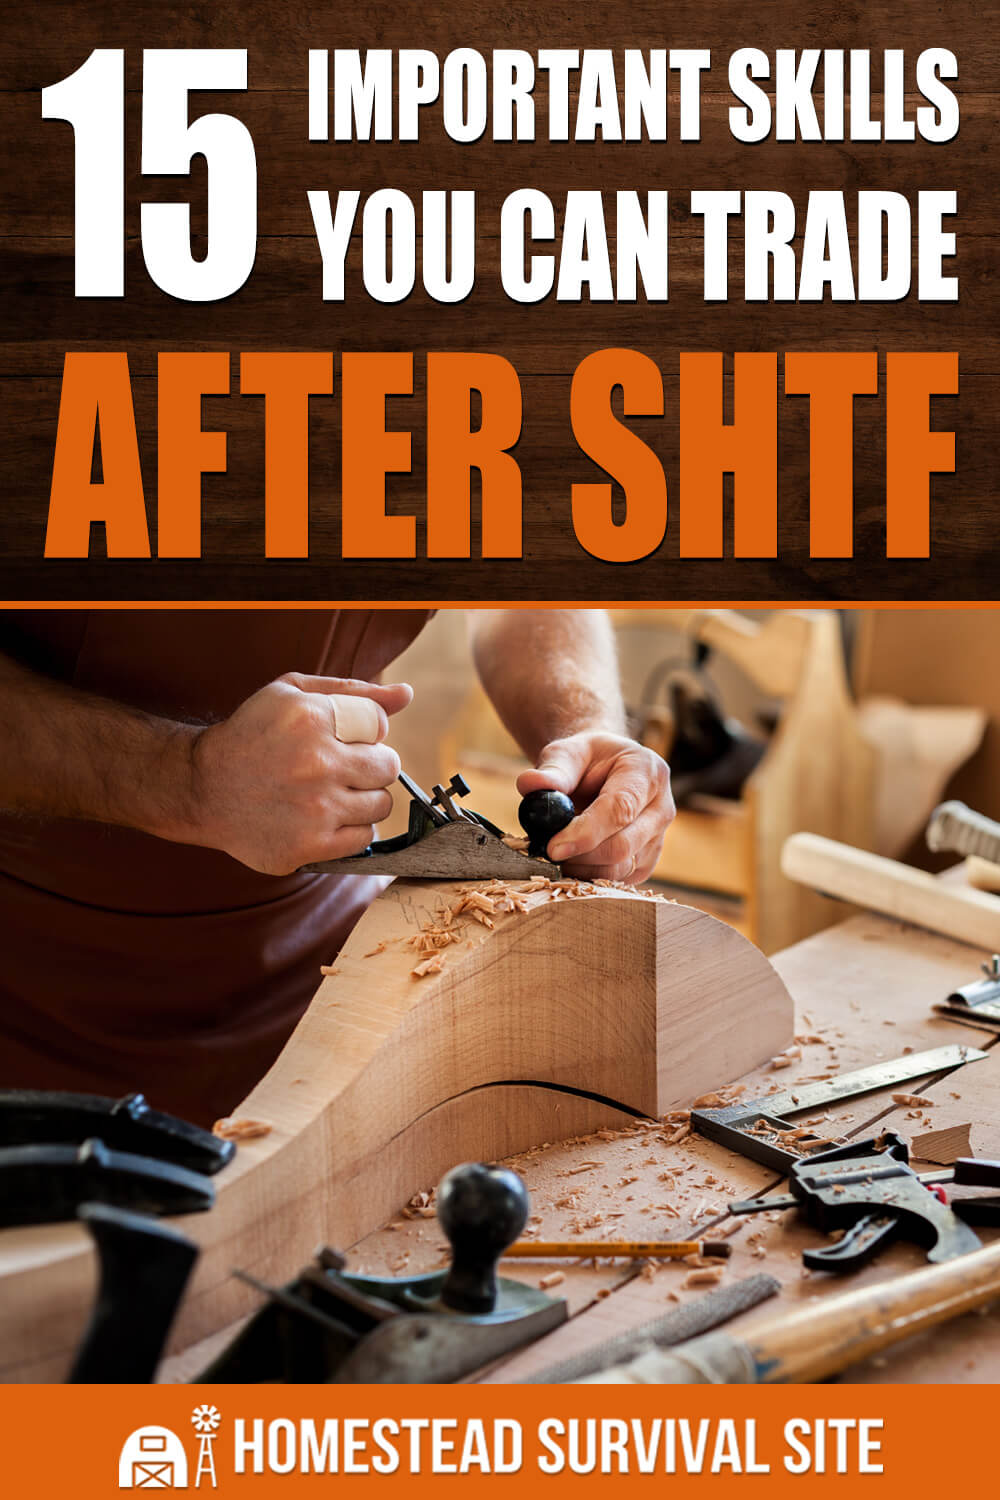 15 Important Skills You Can Trade After SHTF